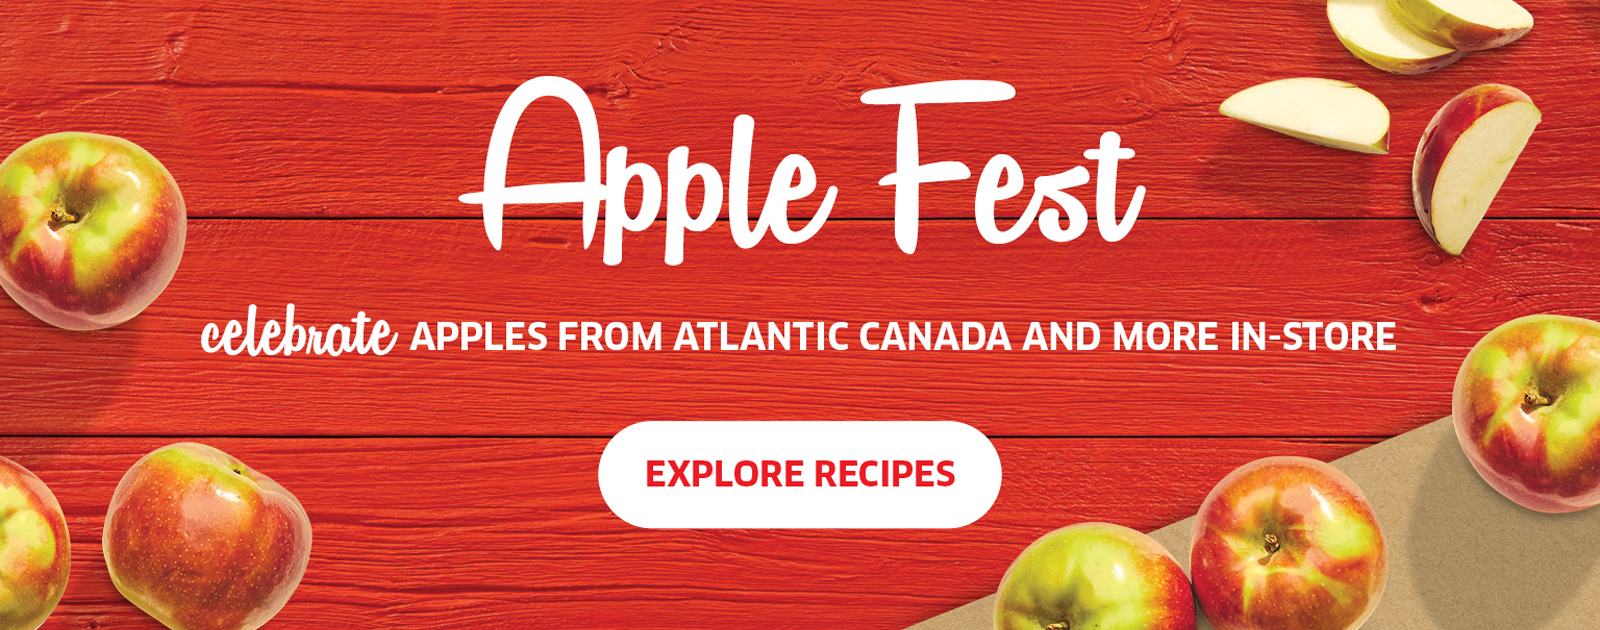 Text Reading 'To us Local means supporting our neighbours. Apple Fest. Celebrate Local apples and more in-store. Click on 'Explore Recipes' button for more information.'